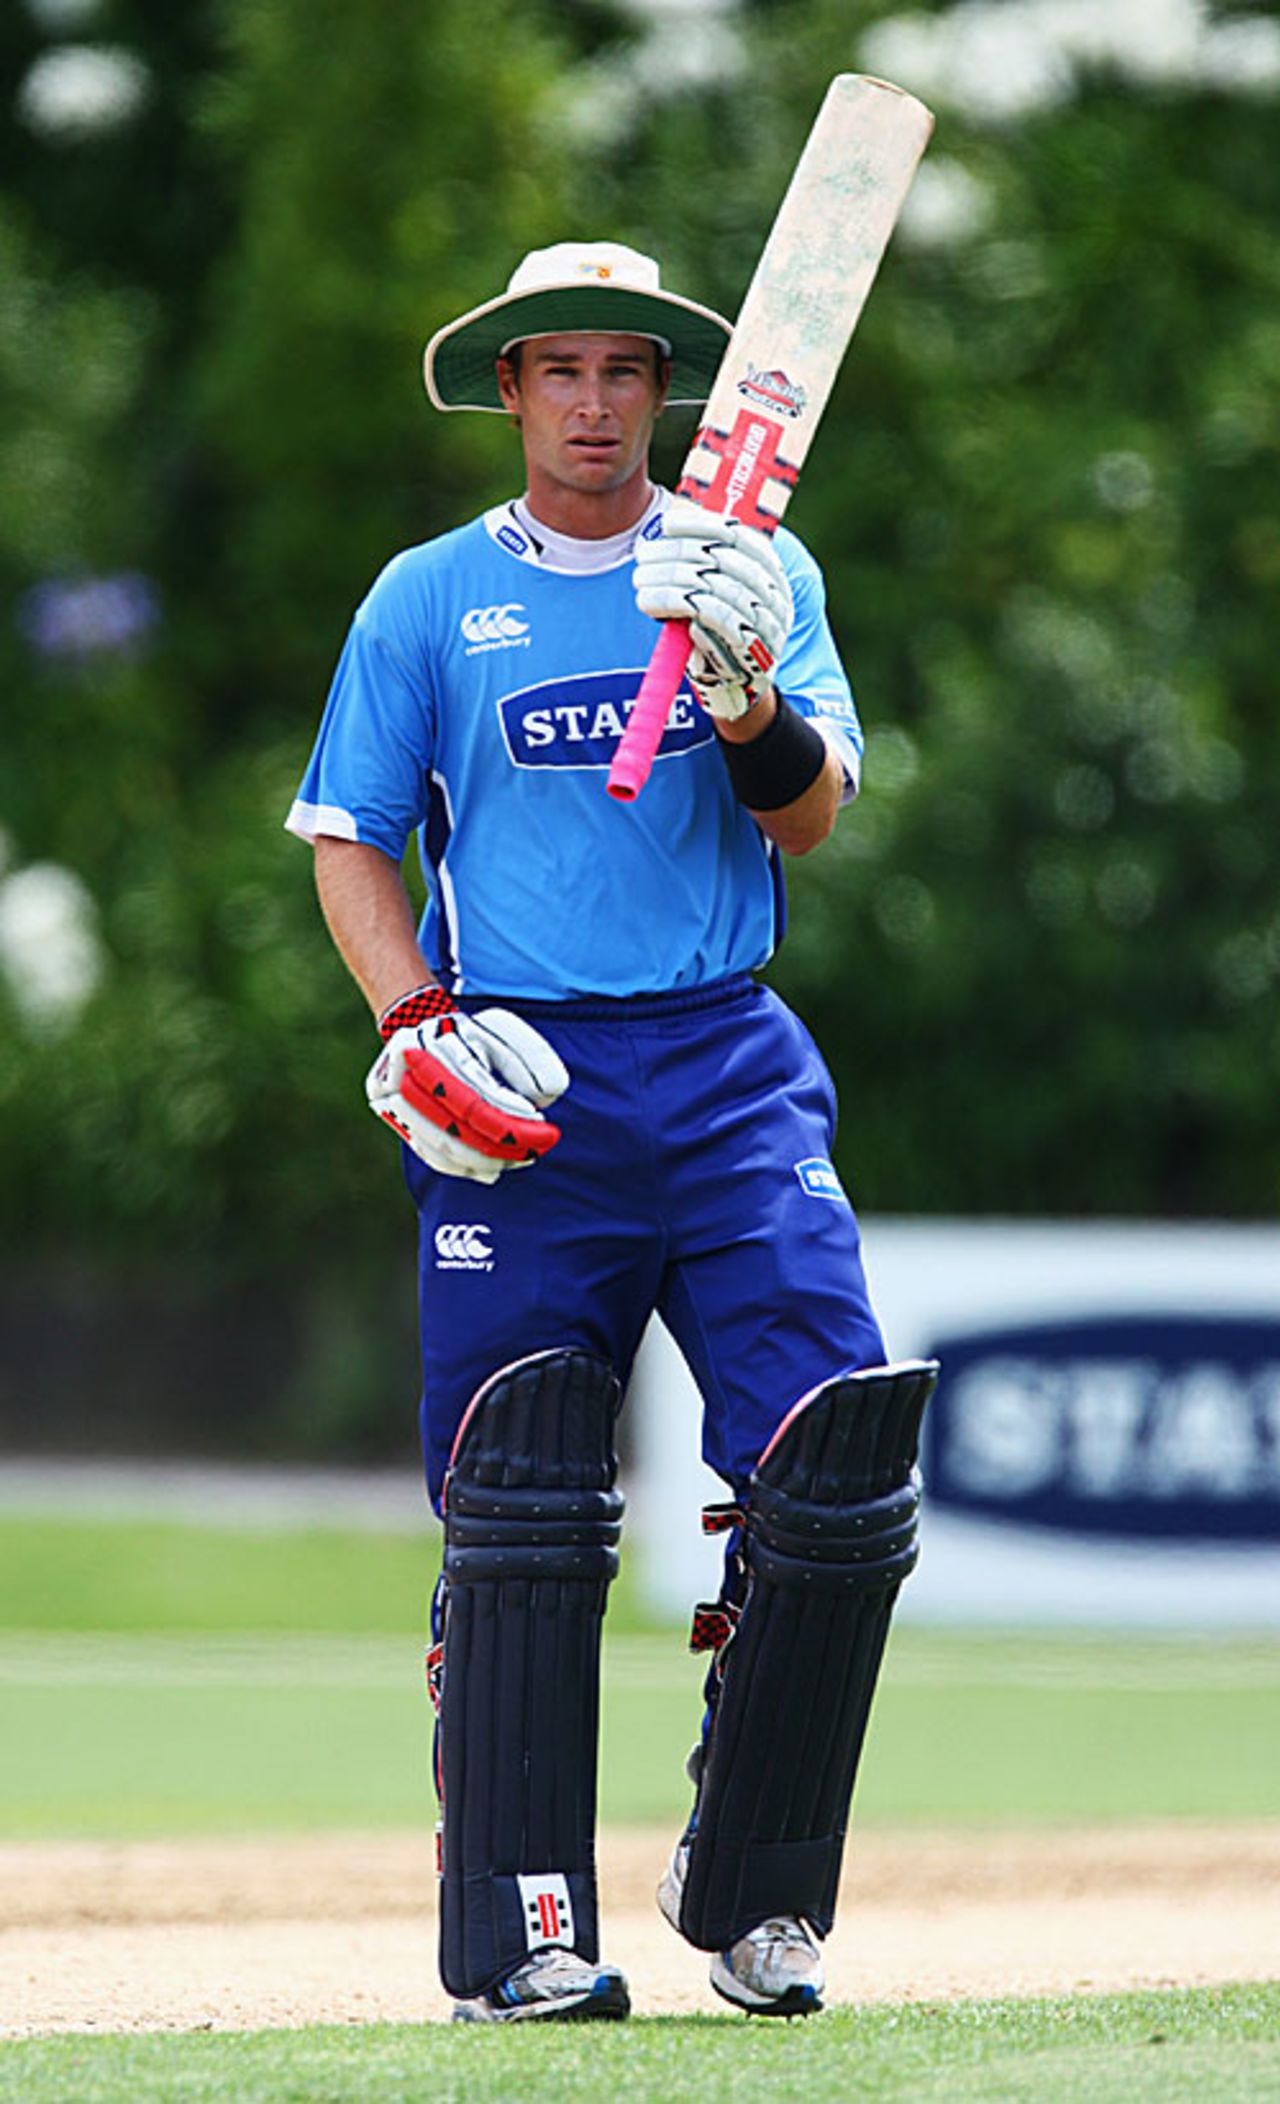 Reece Young acknowledges his half-century, Auckland v Northern Districts, State Shield, Eden Park Outer Oval, January 21, 2009